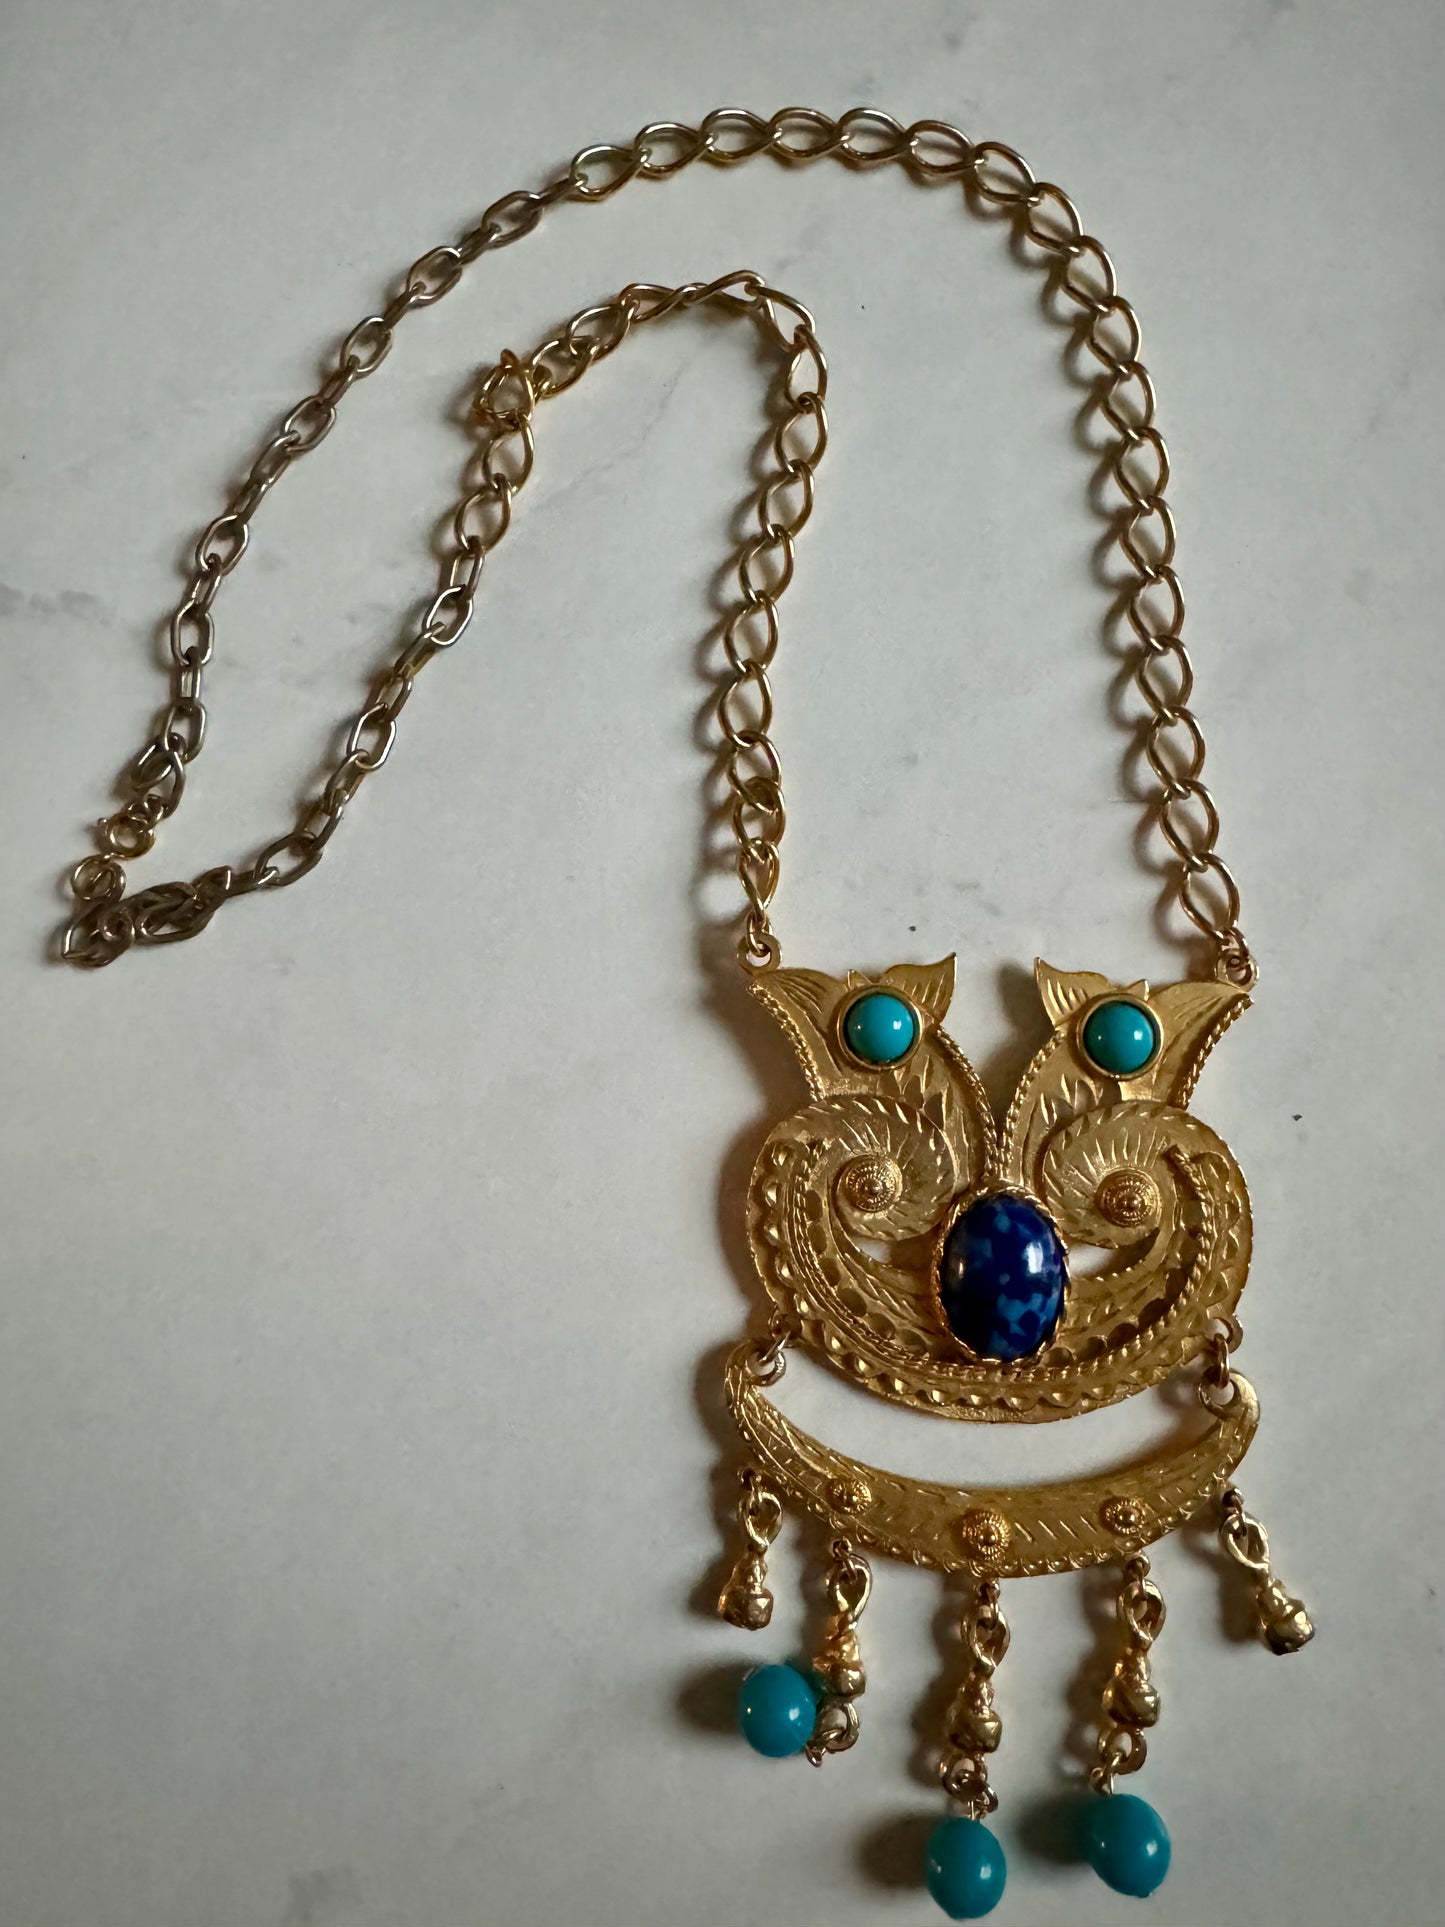 Stunning 1960s pendant necklace with turquoise and blue stones